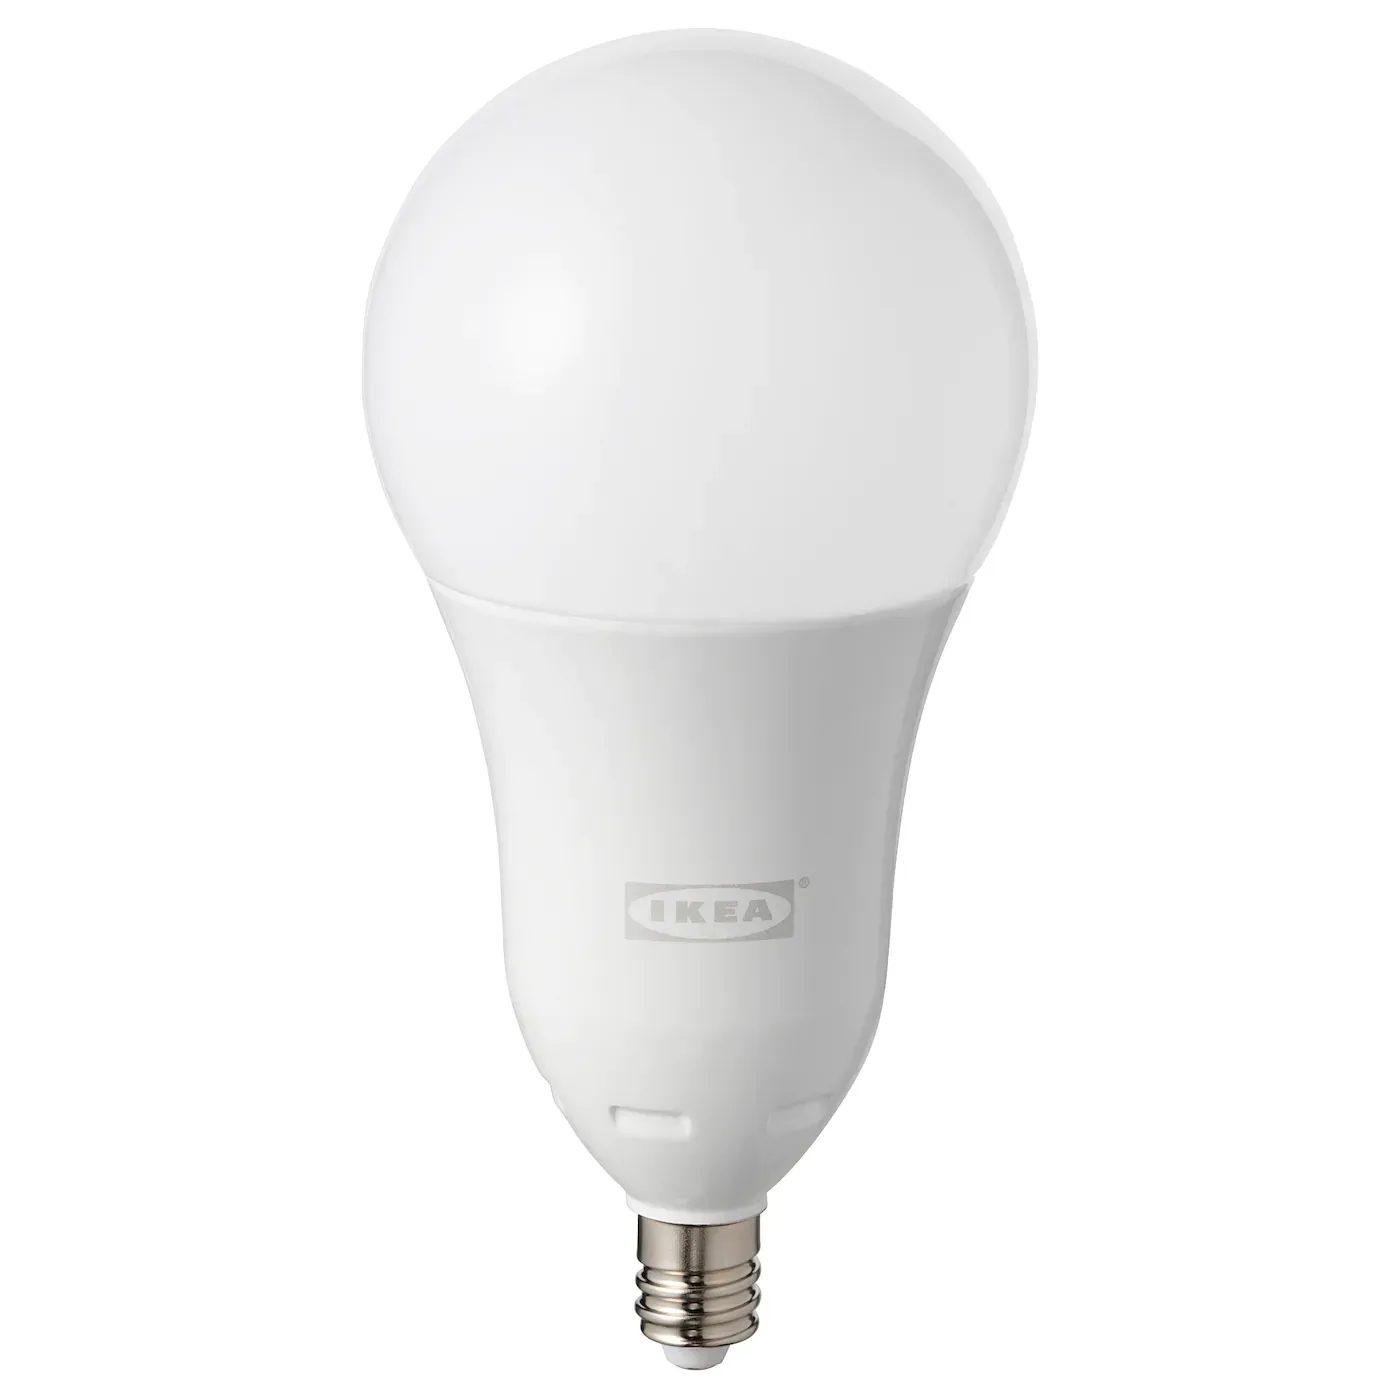 Tradfri LED bulb E12 600lm, dimmable color and white spectrum opal